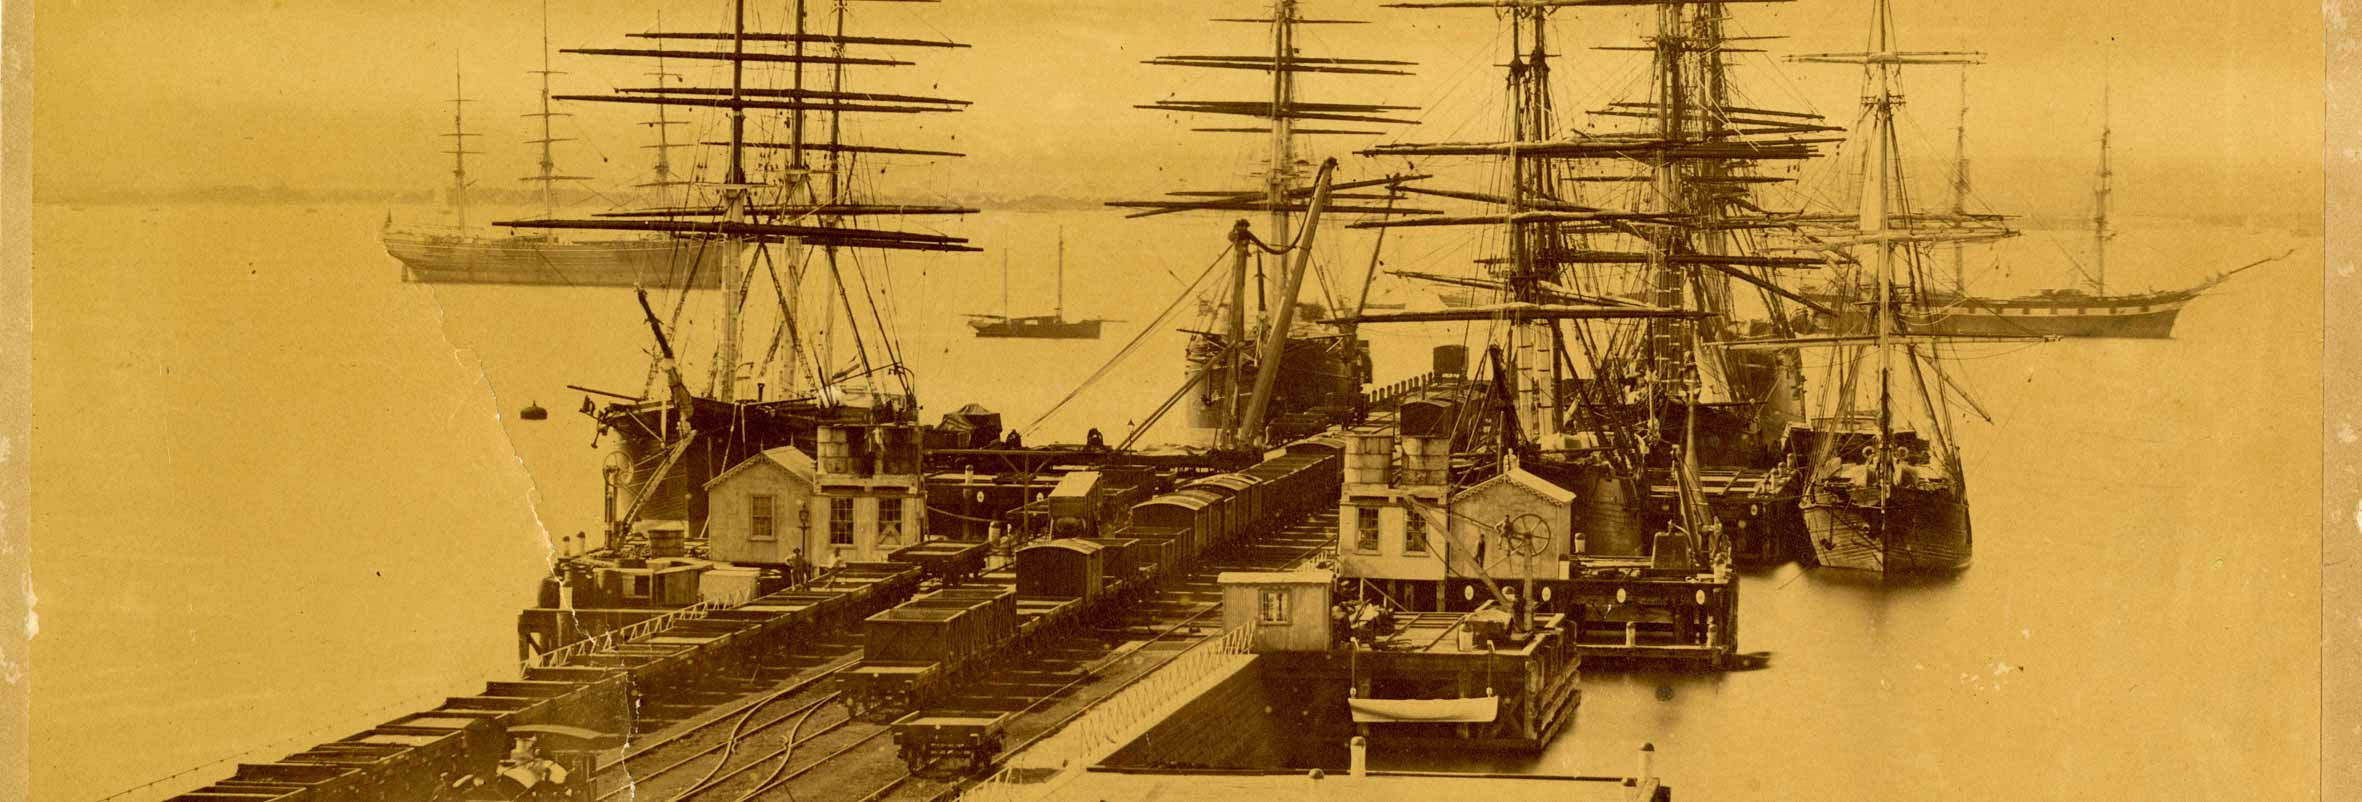 Image of tall ships docked at pier